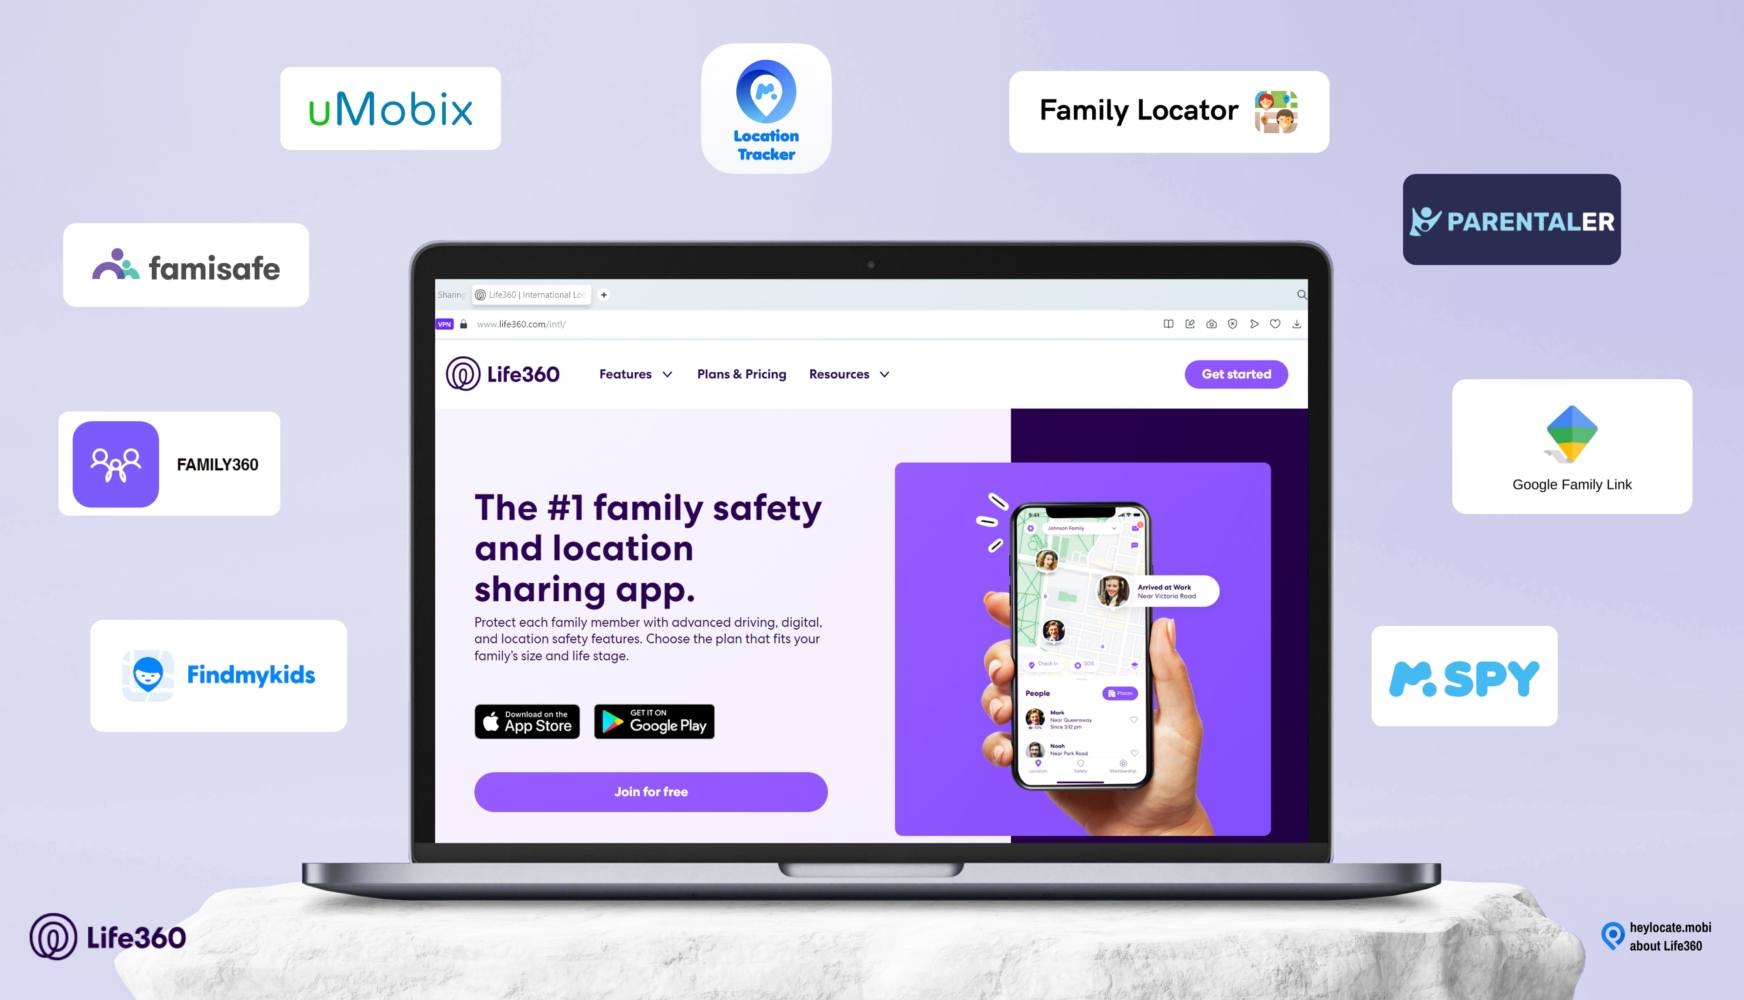 A laptop standing on a table with the Life360 app home page open, surrounded by other web pages from sites such as uMobix, uMobix, Find My Kids, FamiSafe, Parentaler, Family Locator, mSpy, Family360, Google Family Link